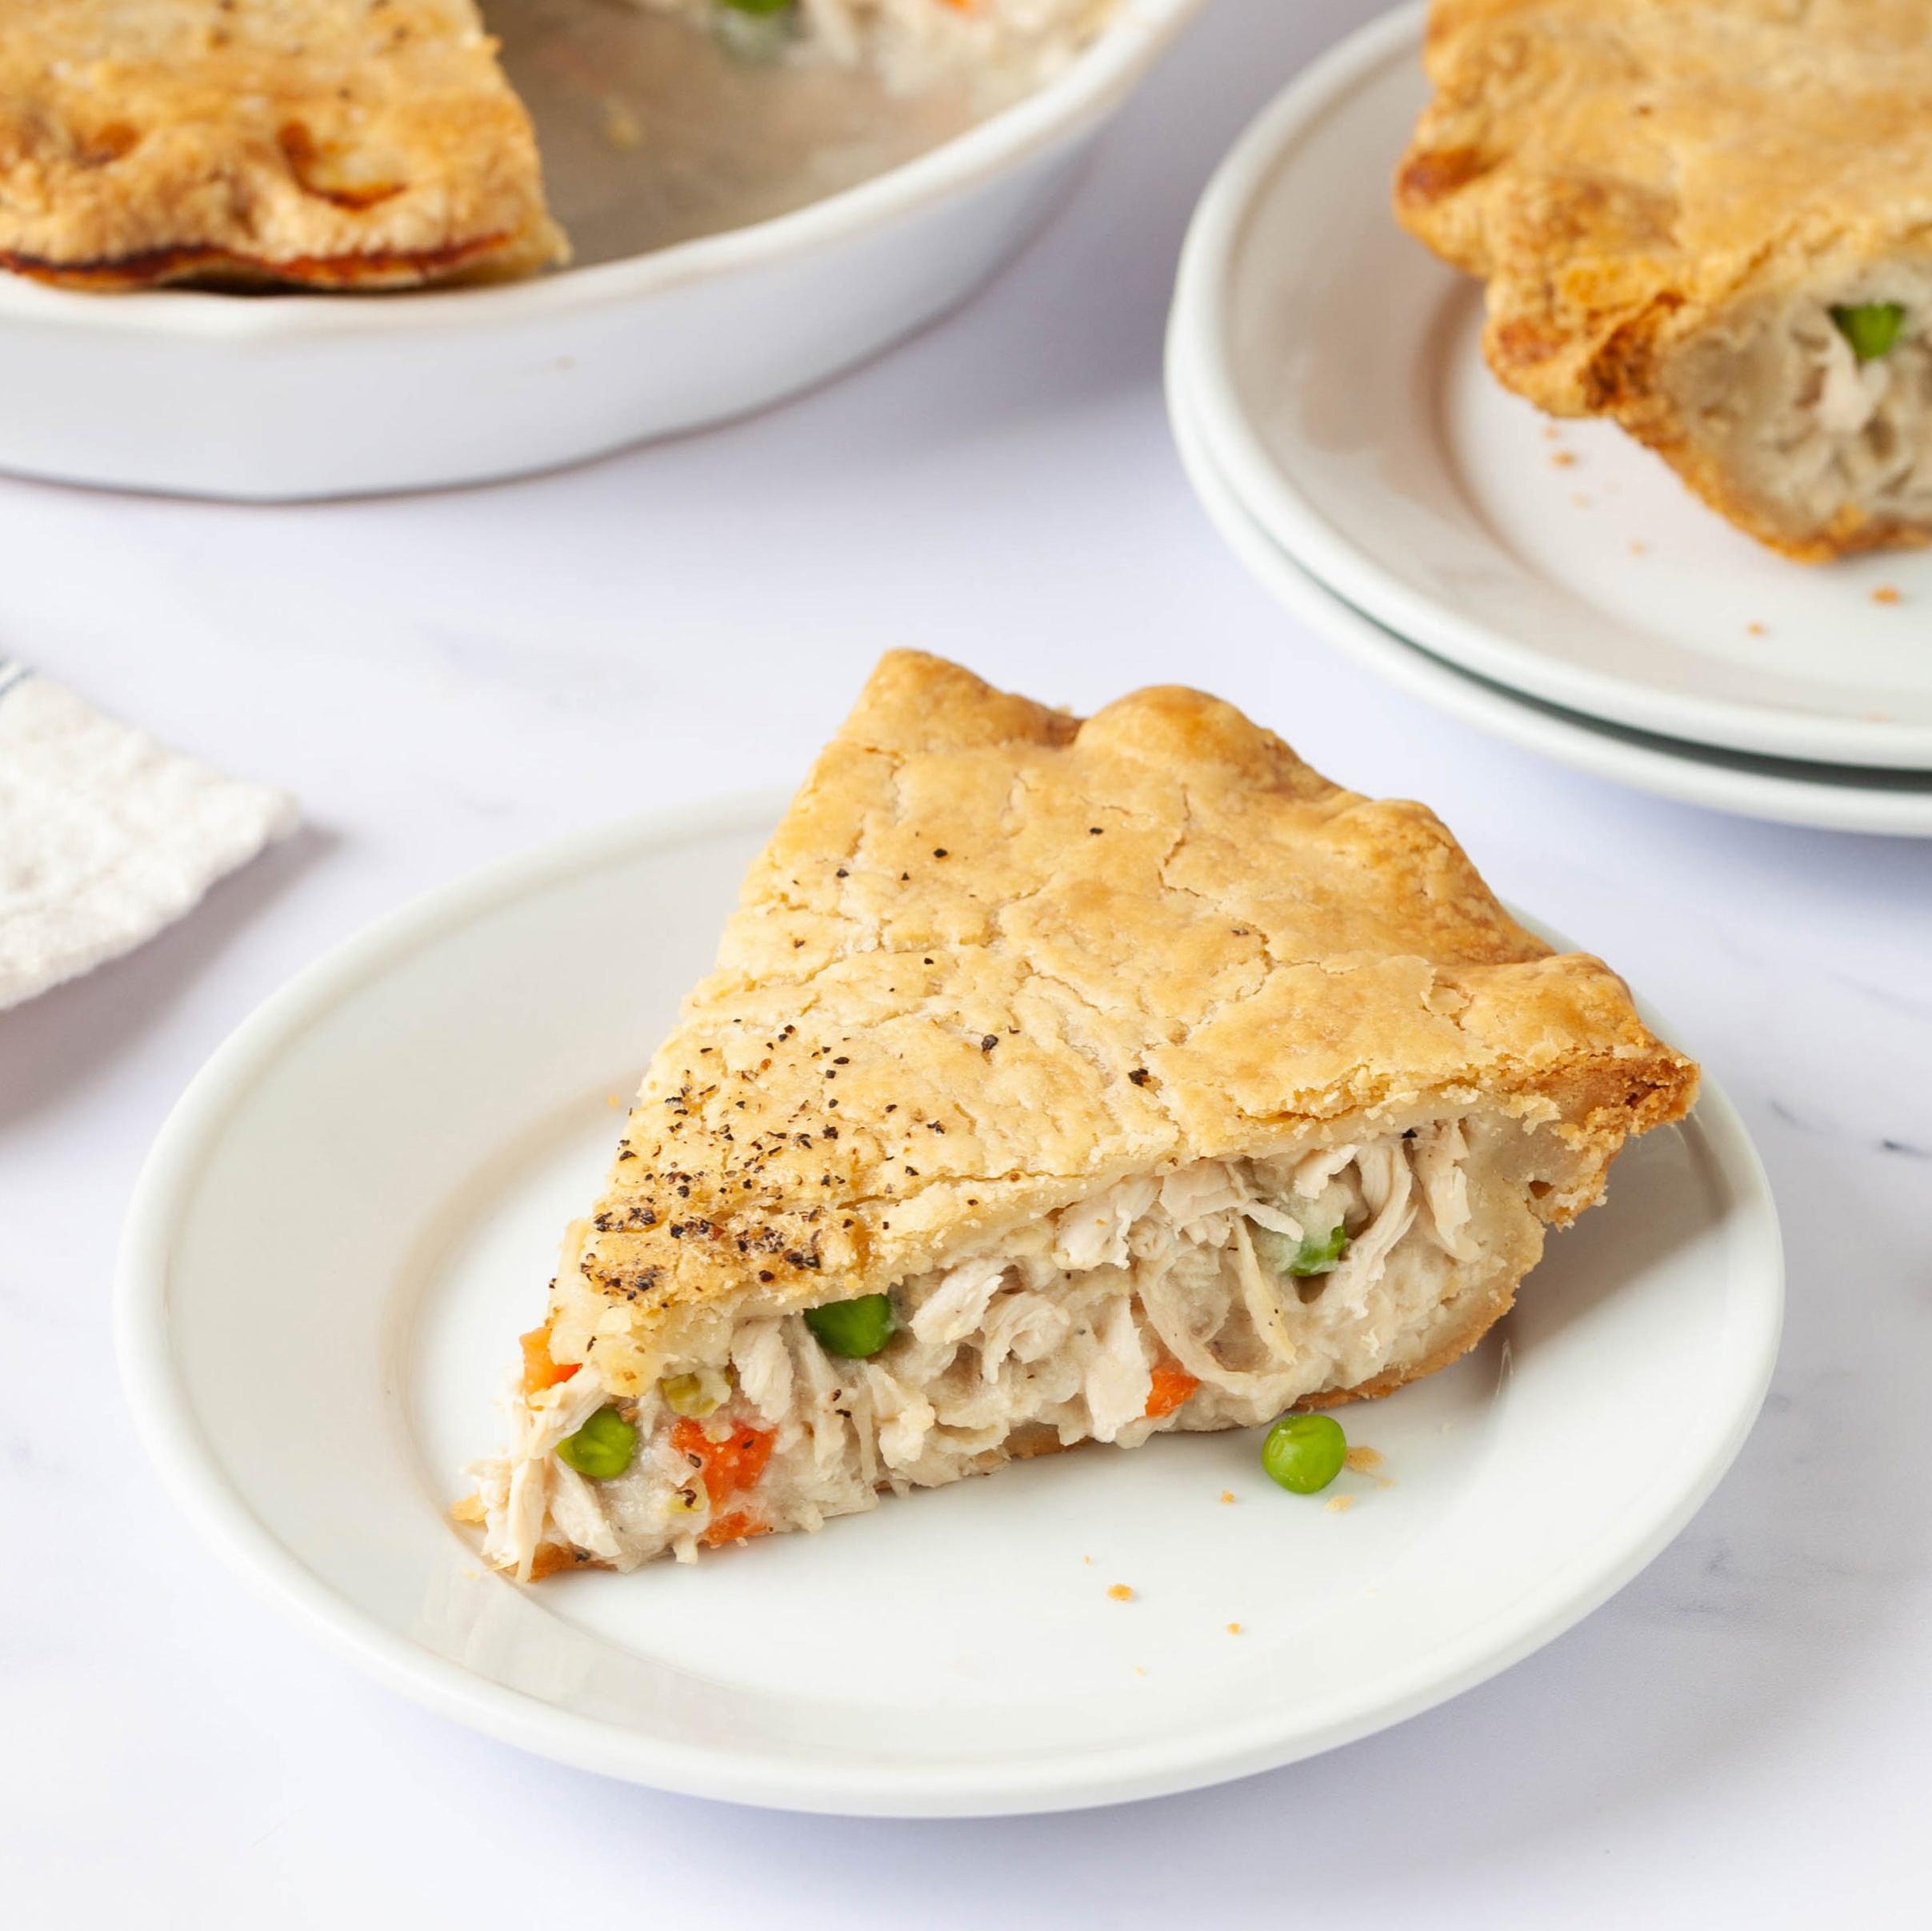  Creamy, cheesy, and oh so satisfying – that’s what this chicken pie is all about!